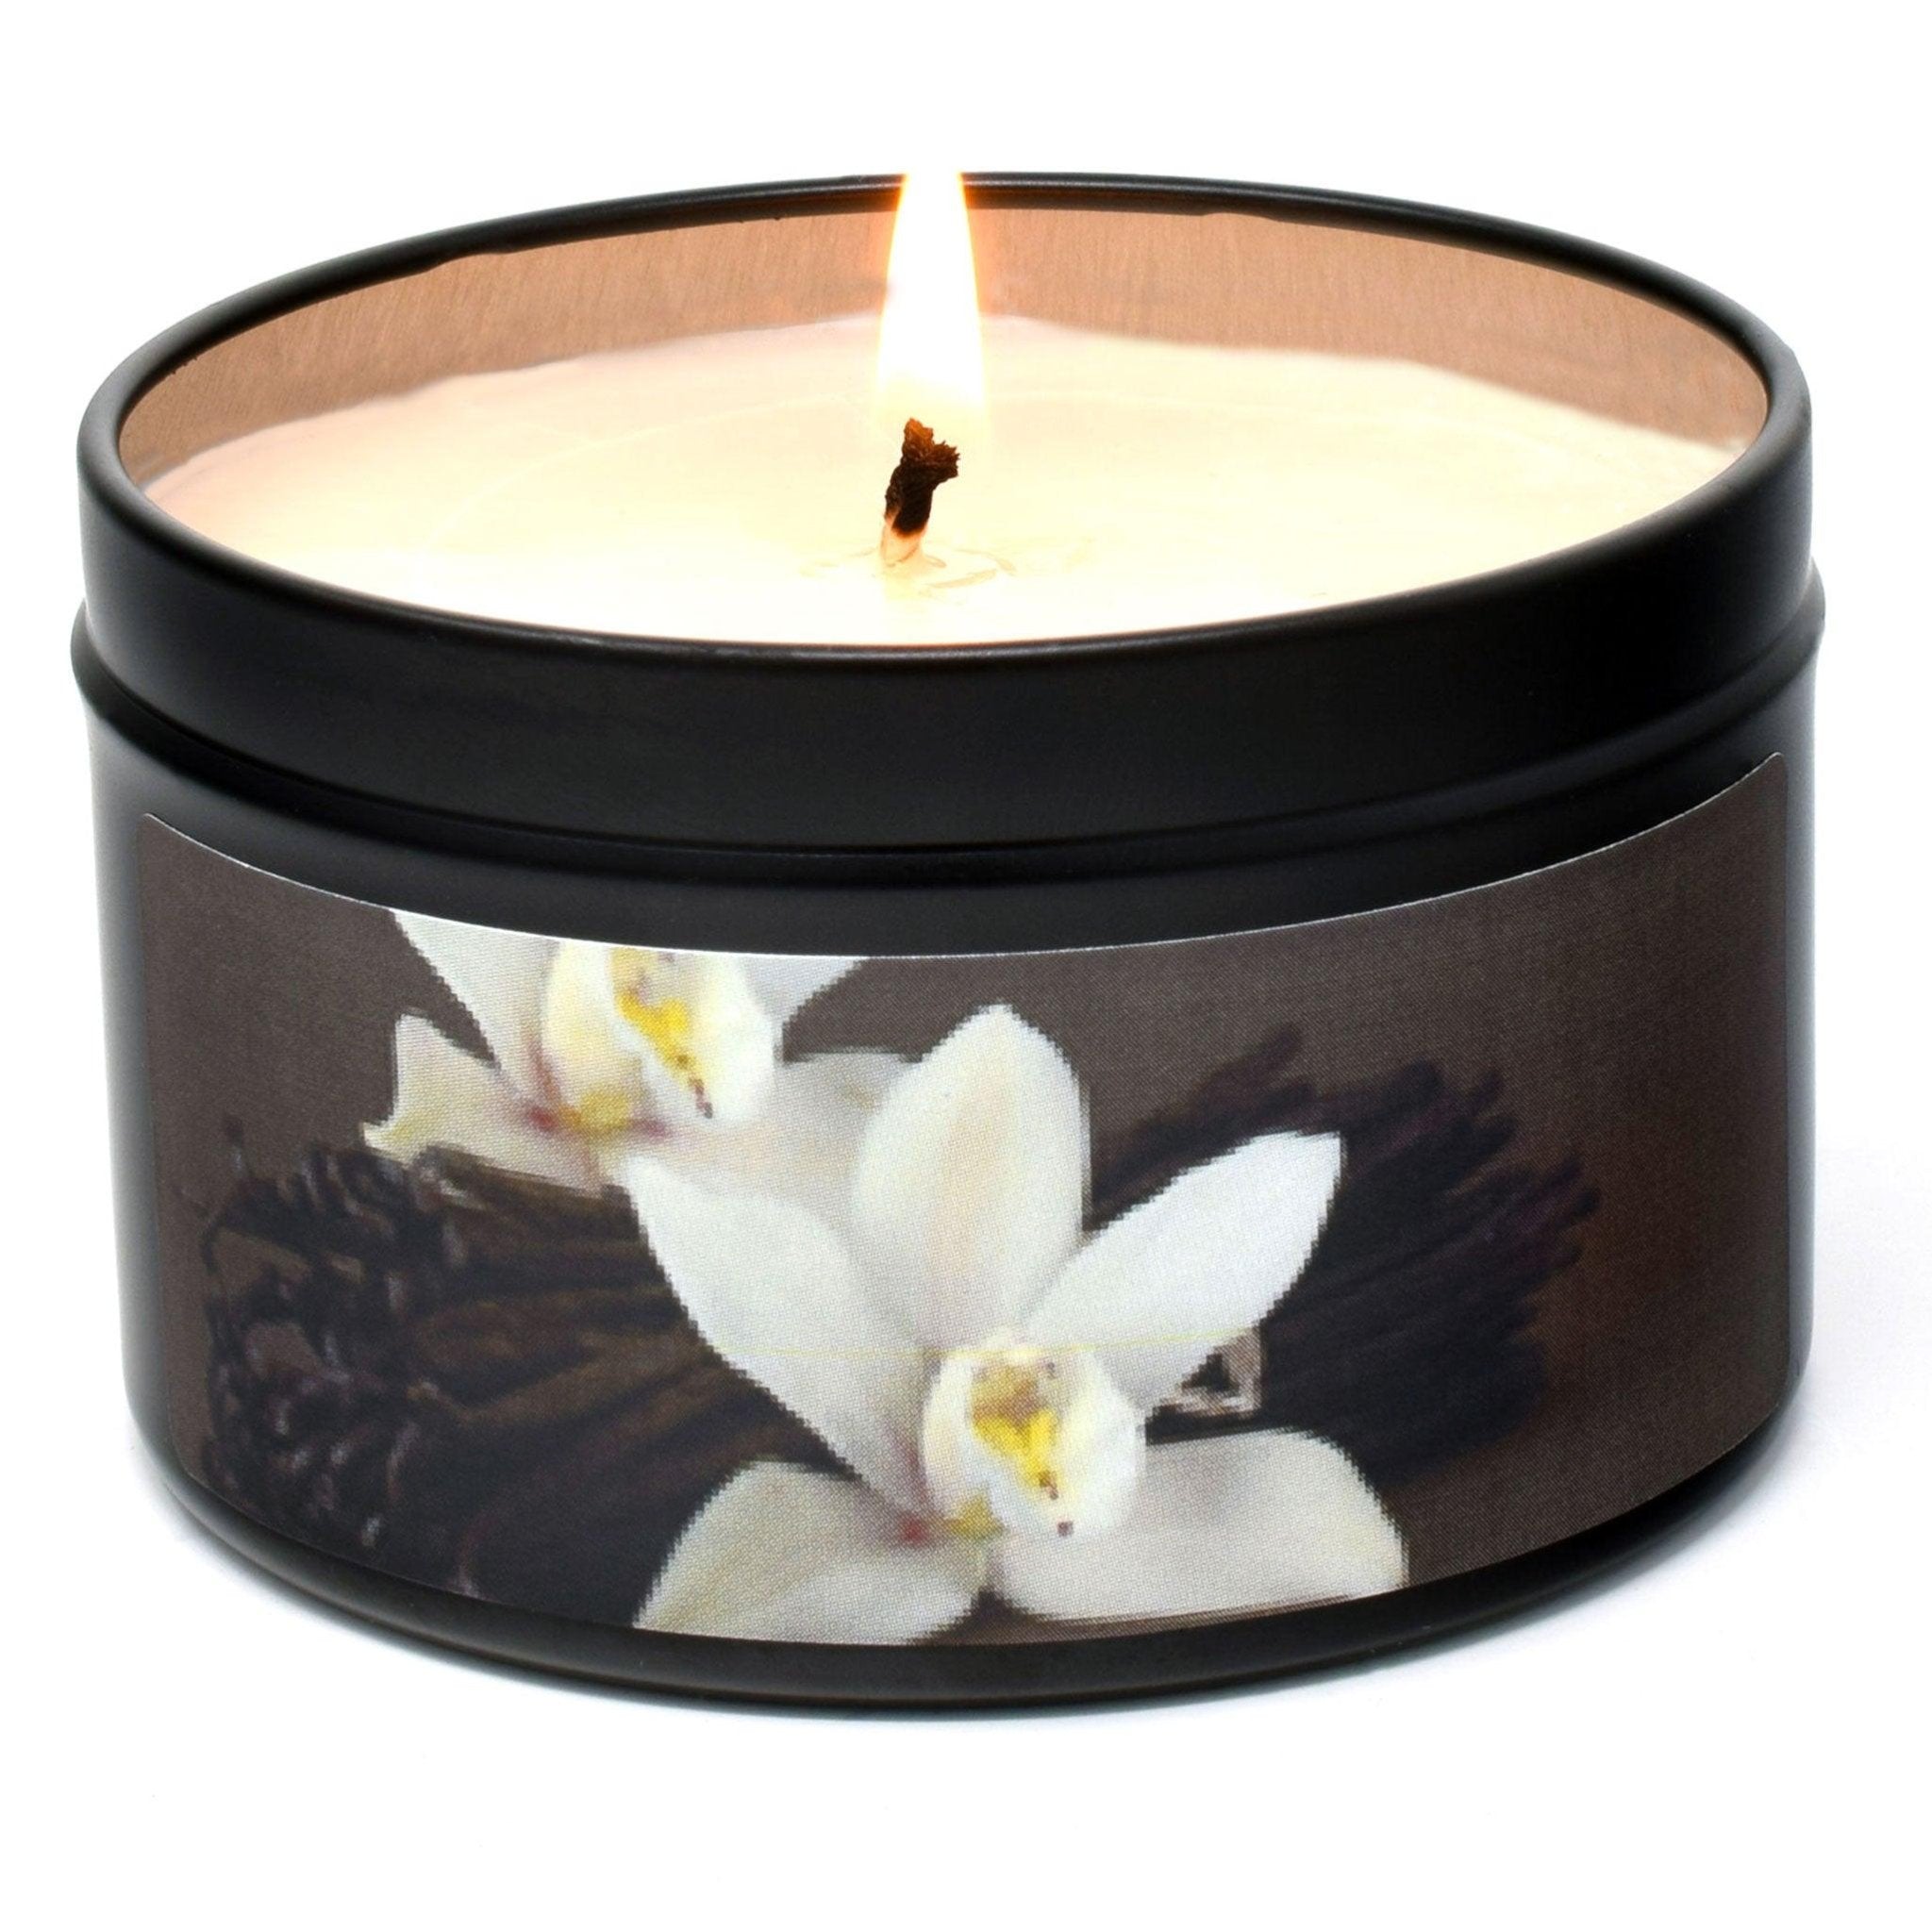 Vanilla Passion, 6oz Soy Candle Tin - Candeo Candle